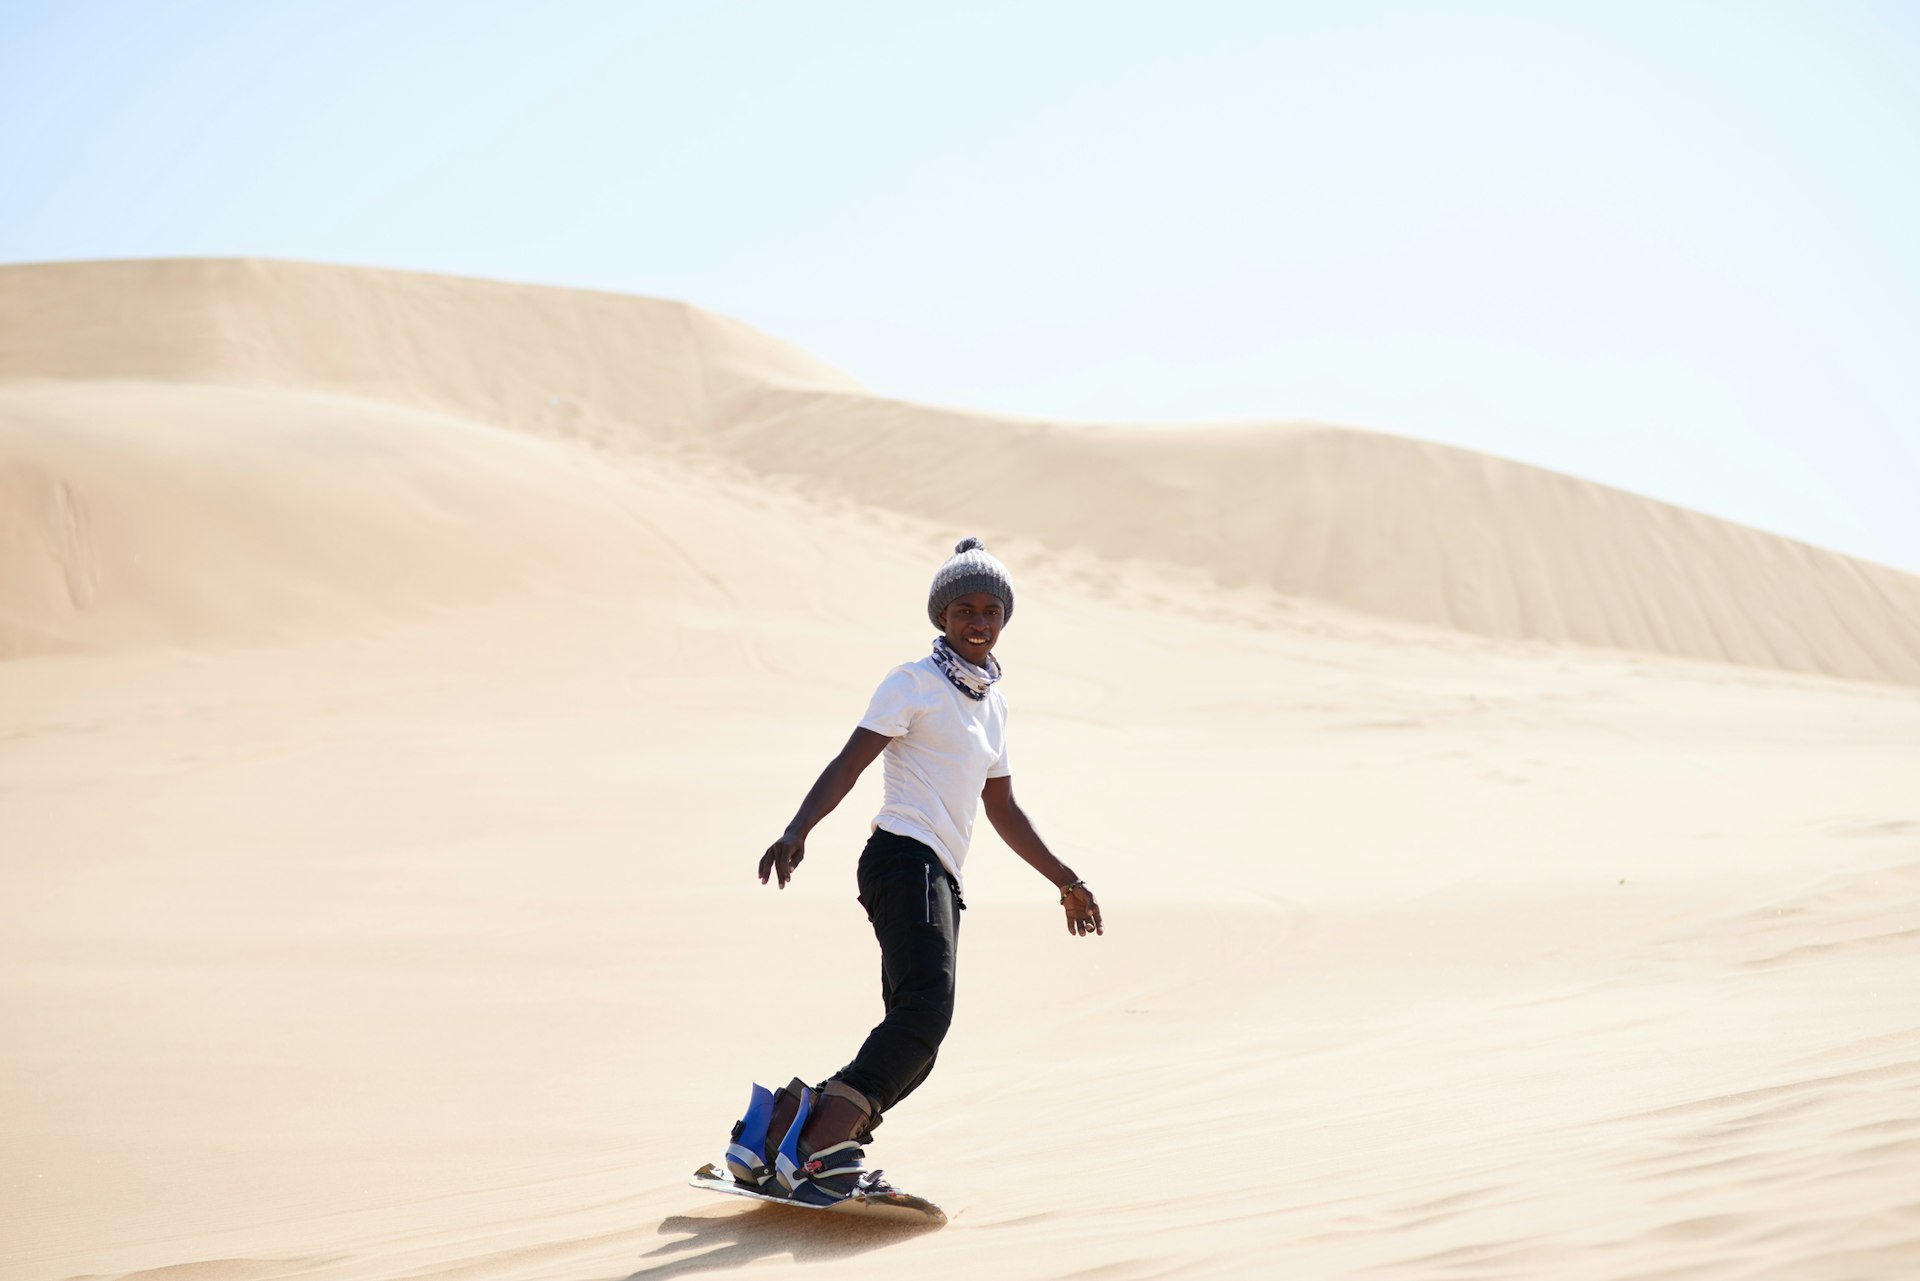 A young man sandboarding in the desert